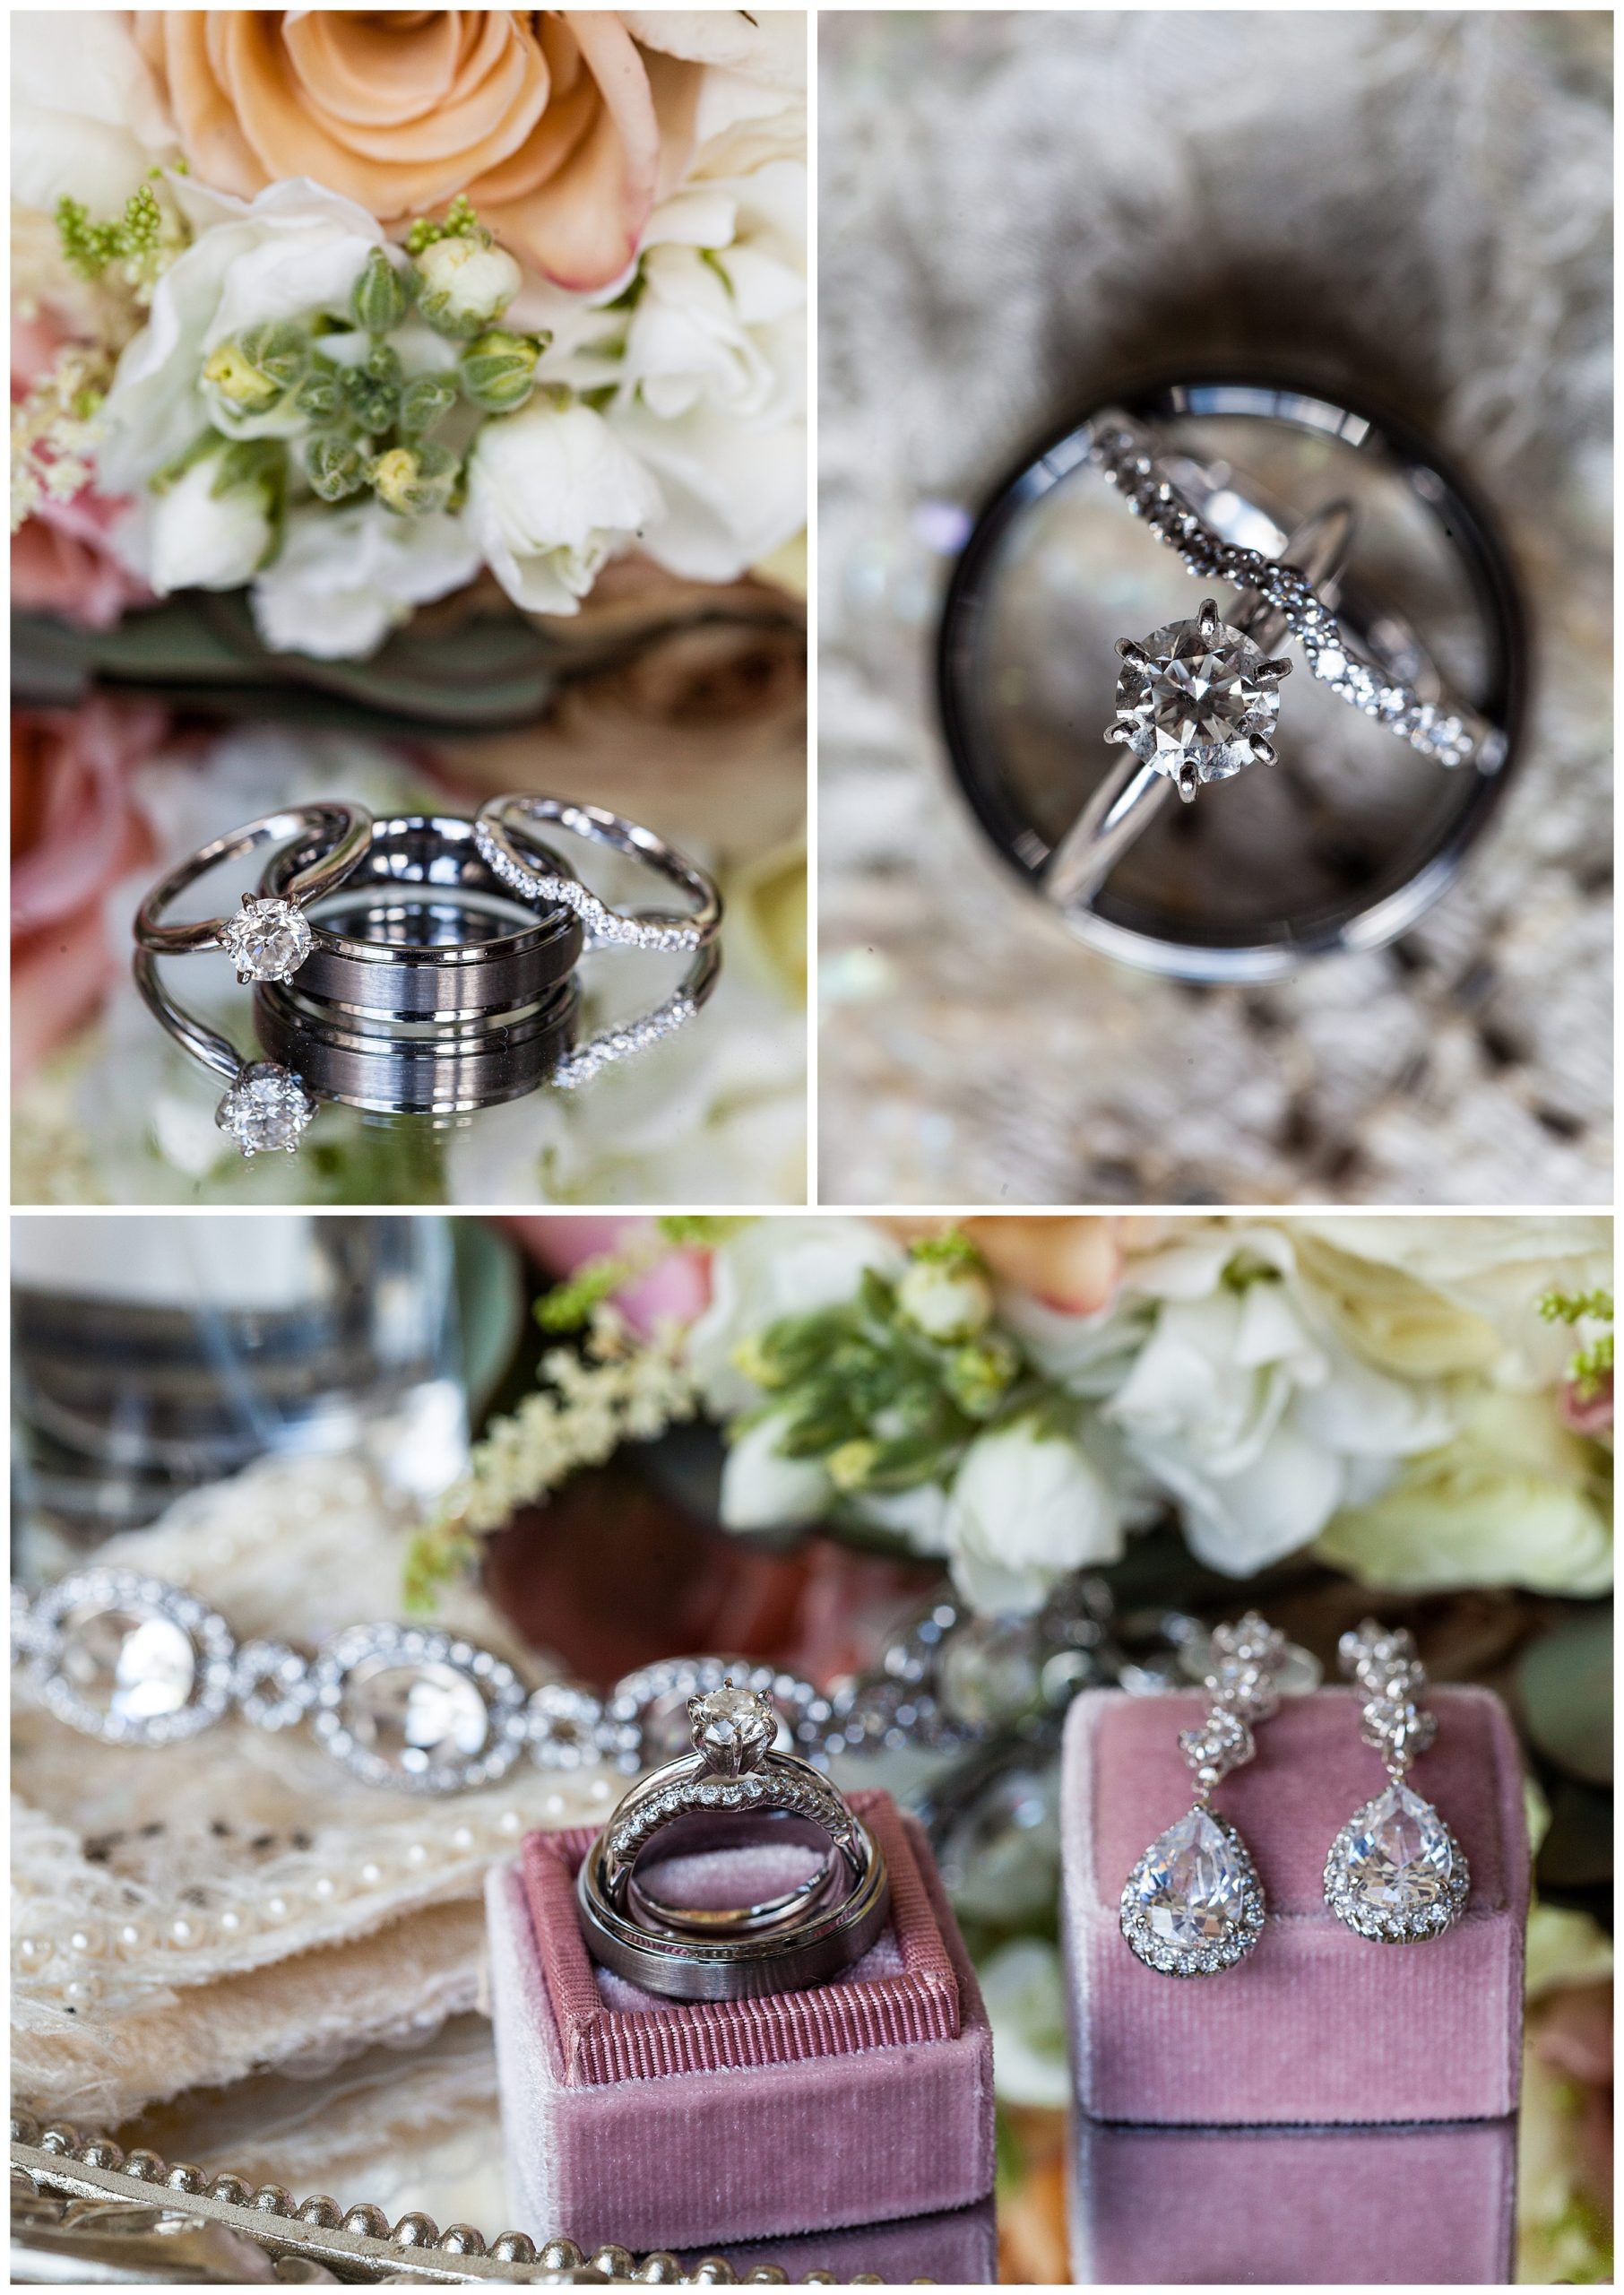 Wedding band and engagement ring detail collage with earrings, bracelet, and florals